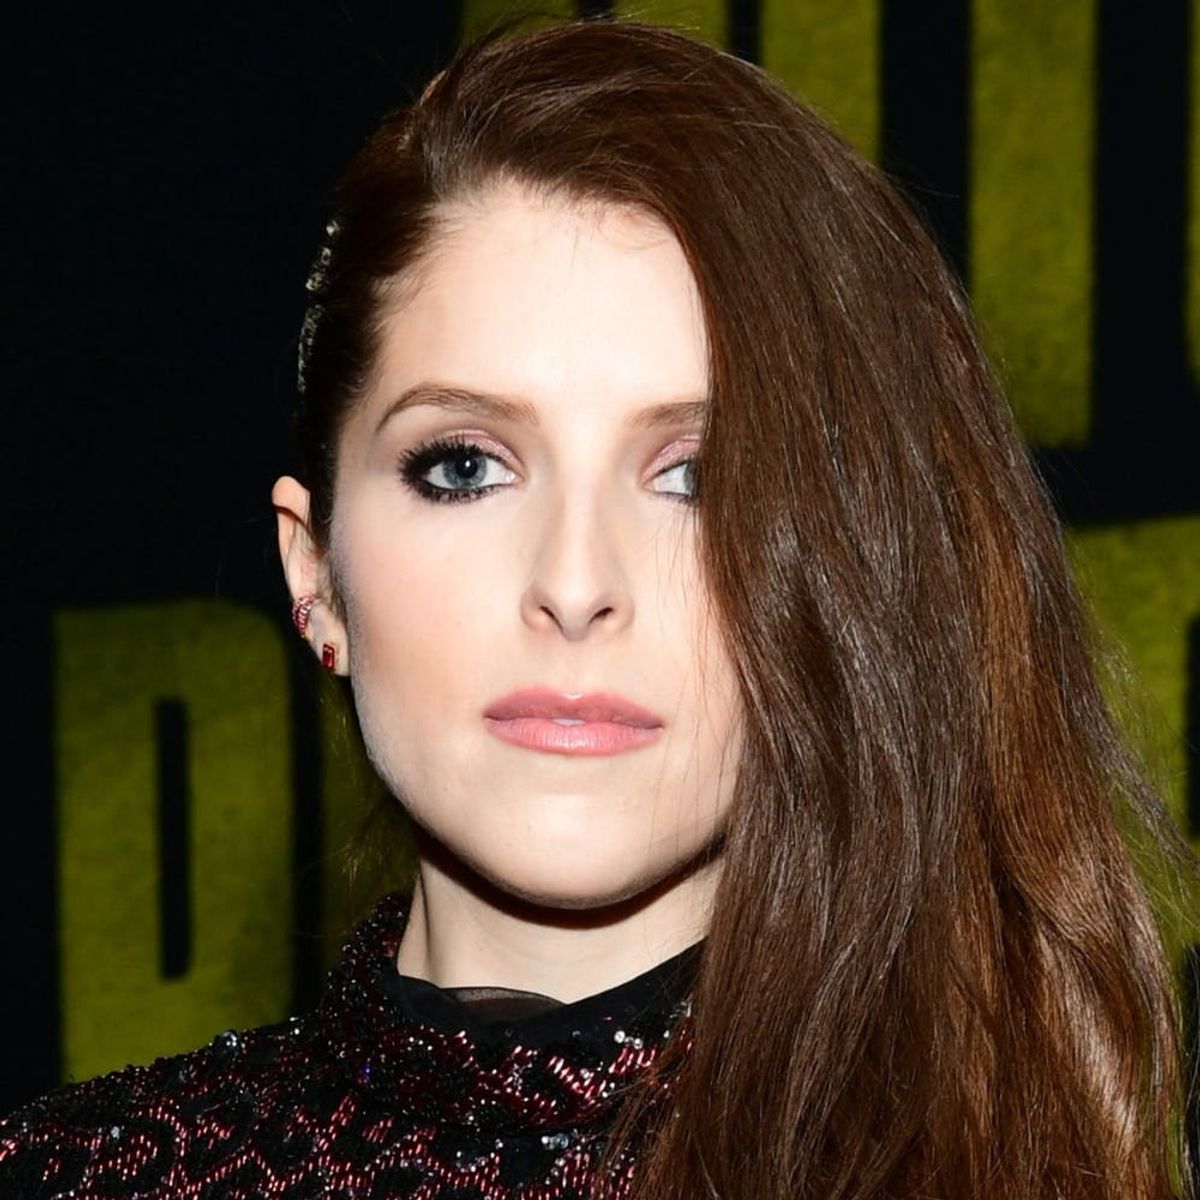 Anna Kendrick Reveals Pressure to Wear Sexier Costumes for “Pitch Perfect 3”